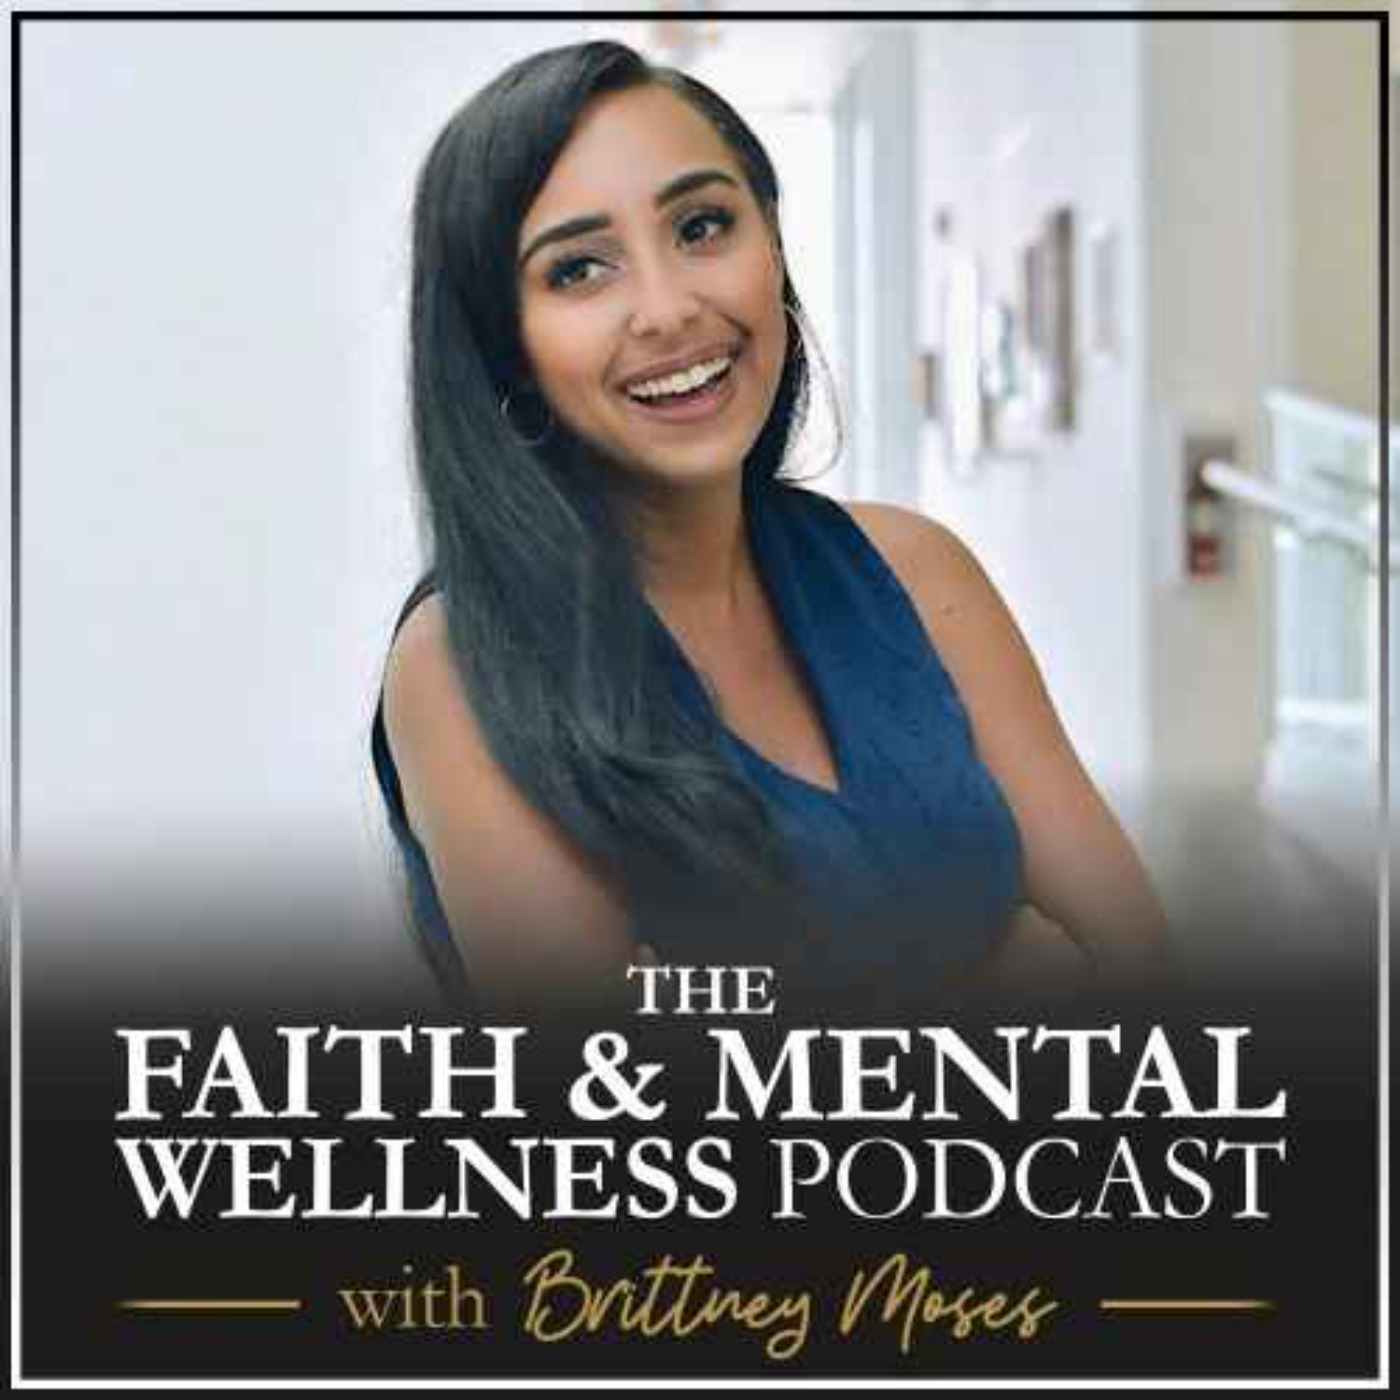 011: How to Heal and Move Forward From a Devastating Break Up with Kait Warman